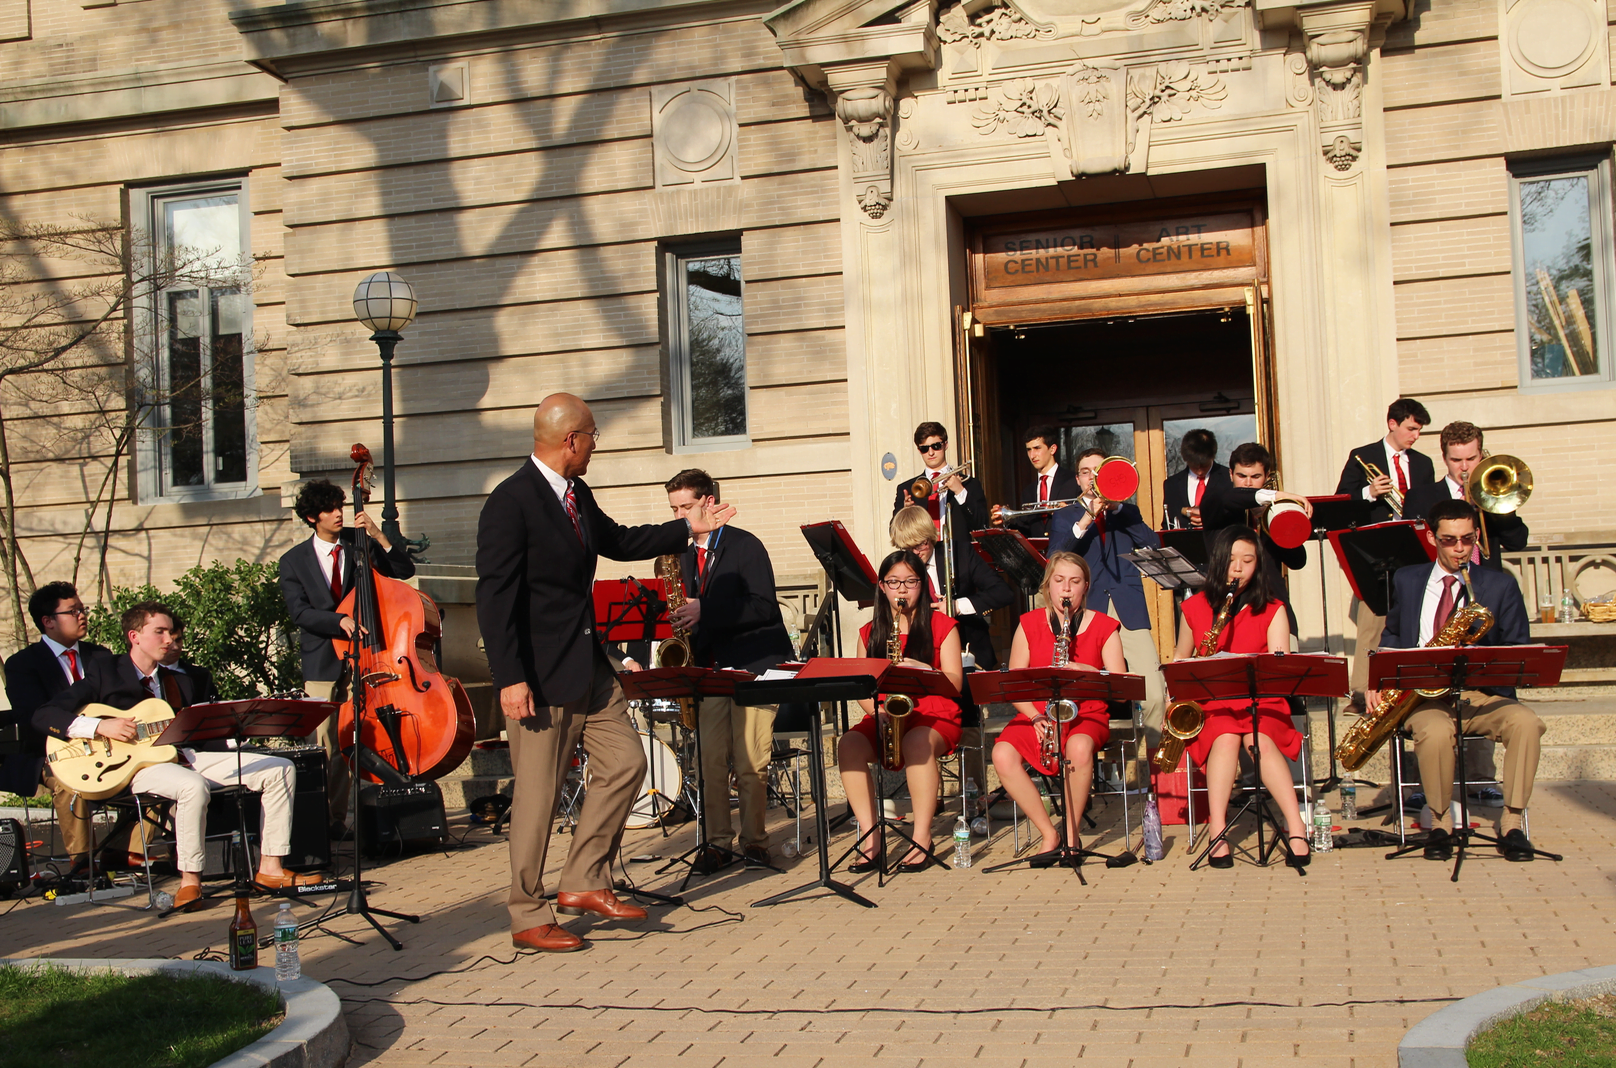 Band director John Yoon with the band outside the Senior Center during Art to the Avenue's opening night. May 3, 2018 Photo: Leslie Yager